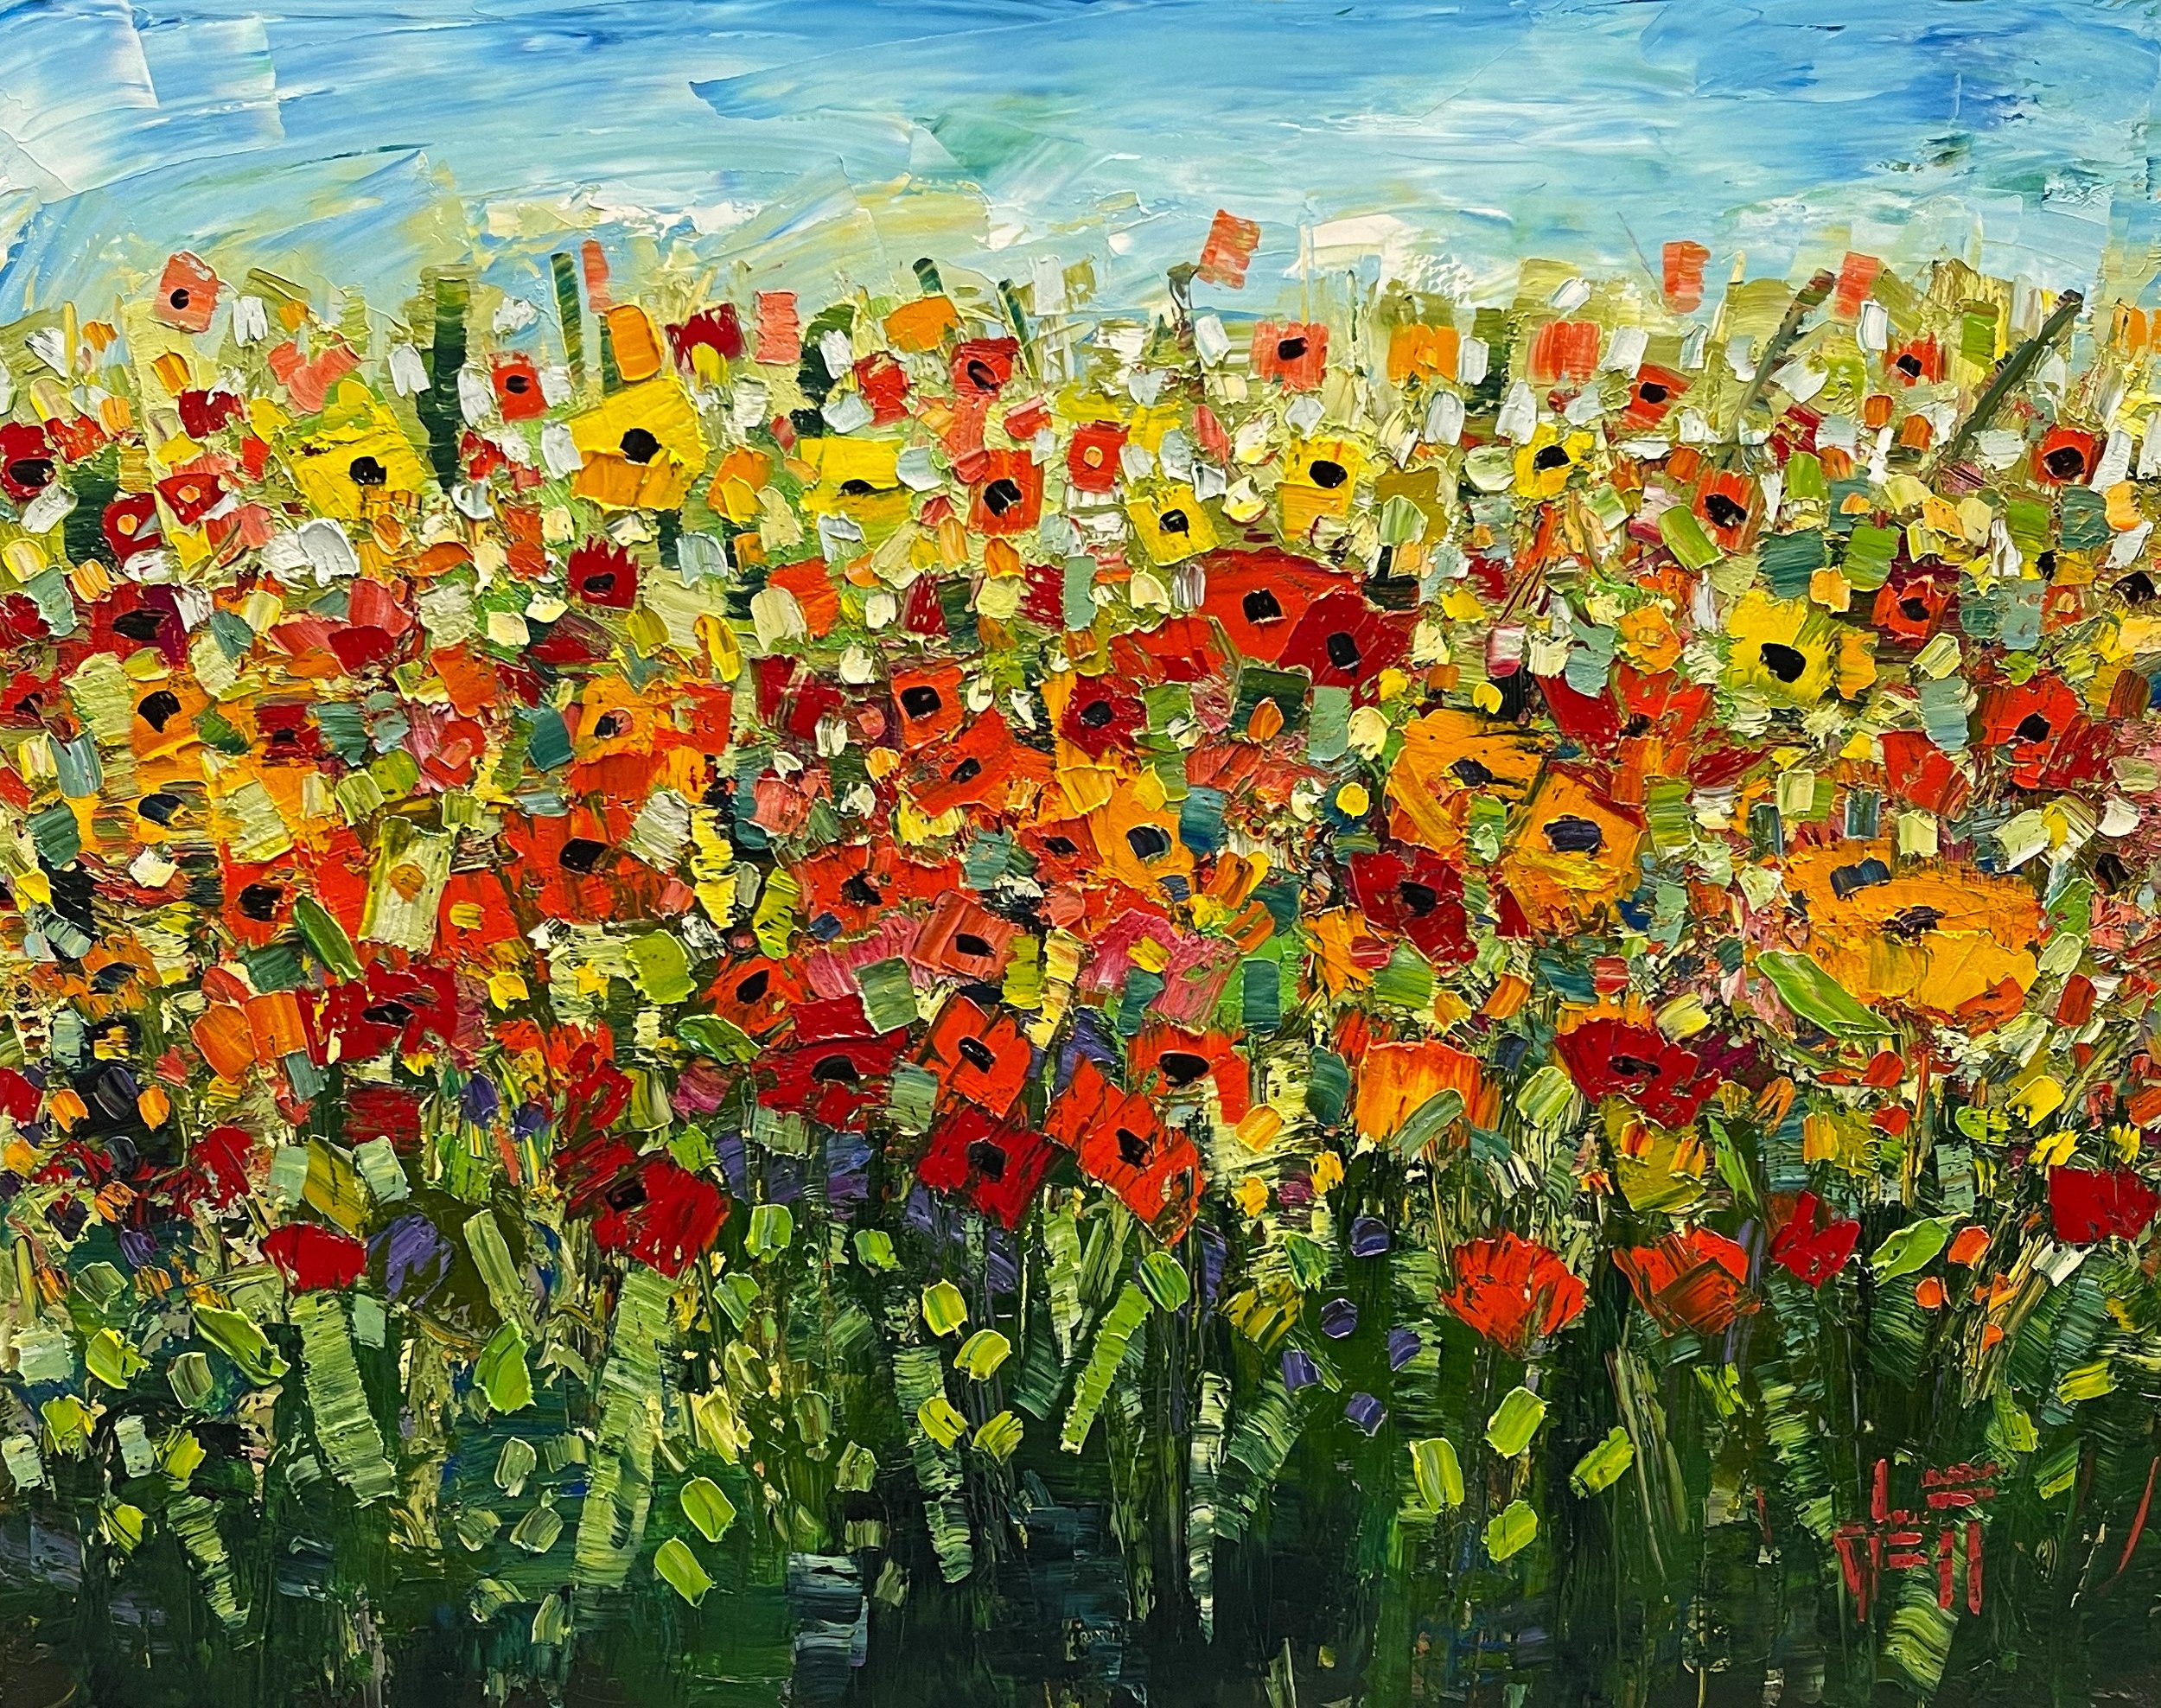  Petal Pushers-oil on canvas 48” x 60”   Art Resources 